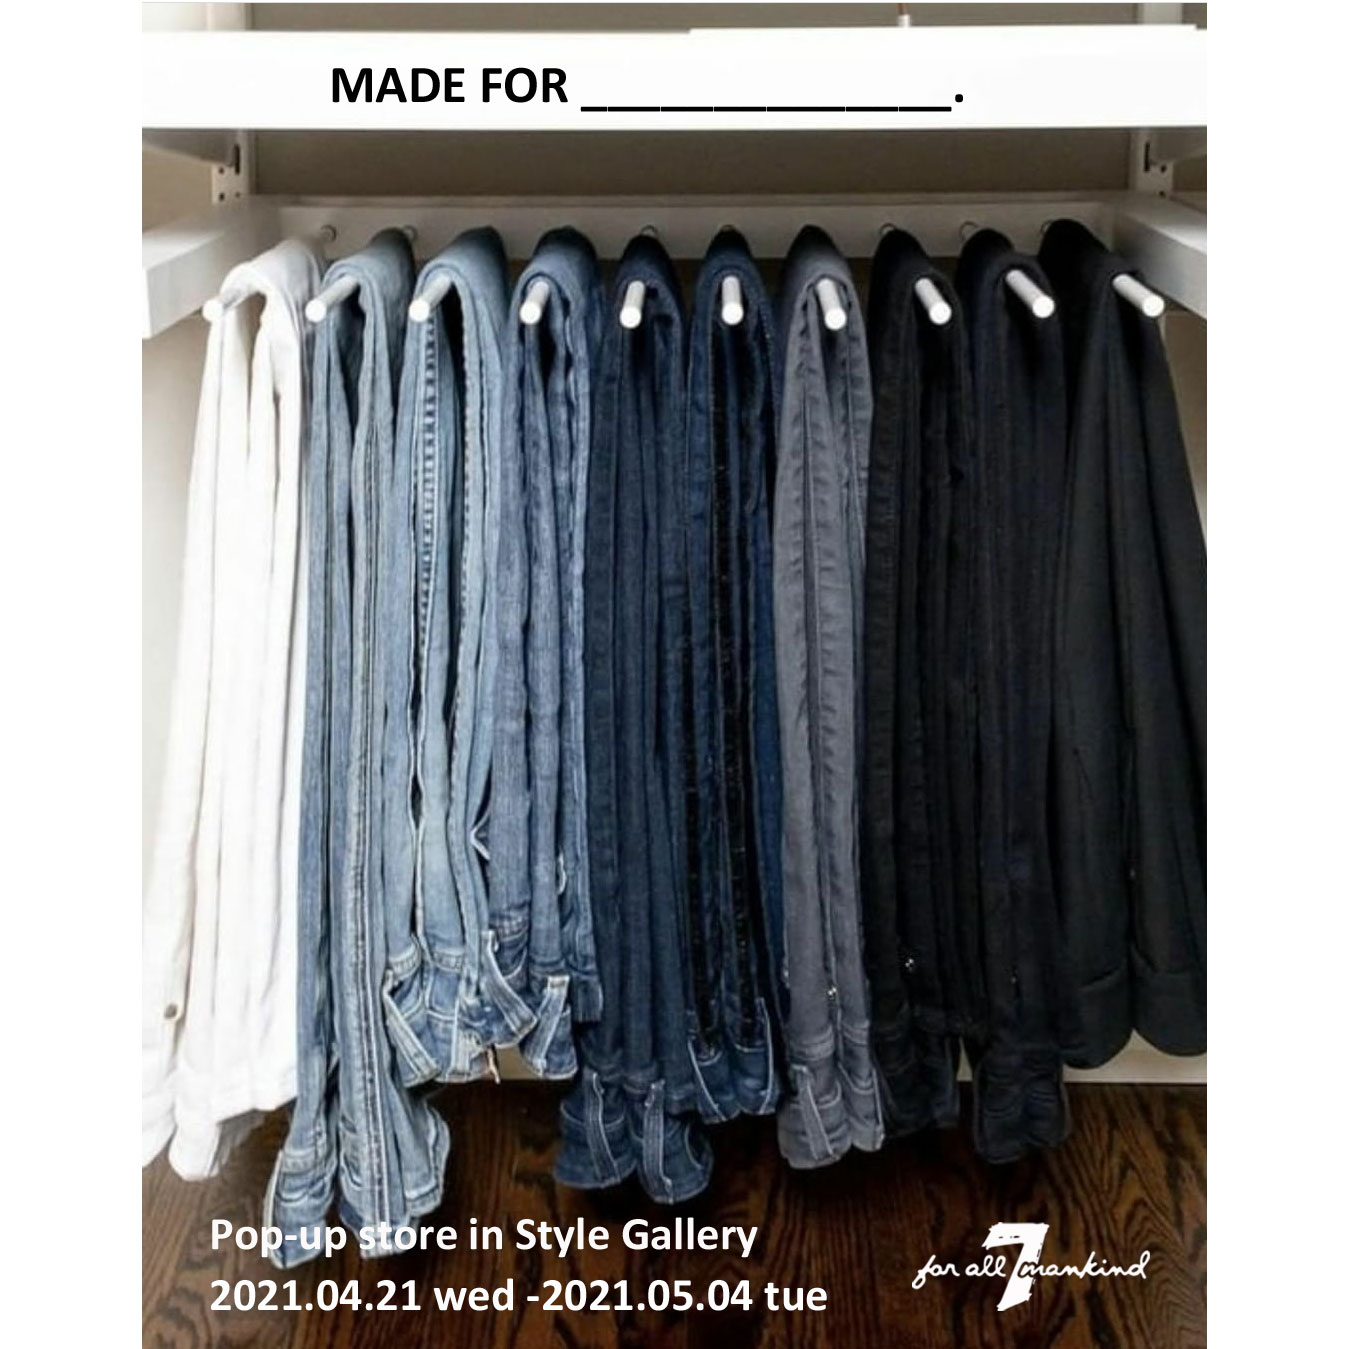 Pop-up store in"STYLE GALLERY"